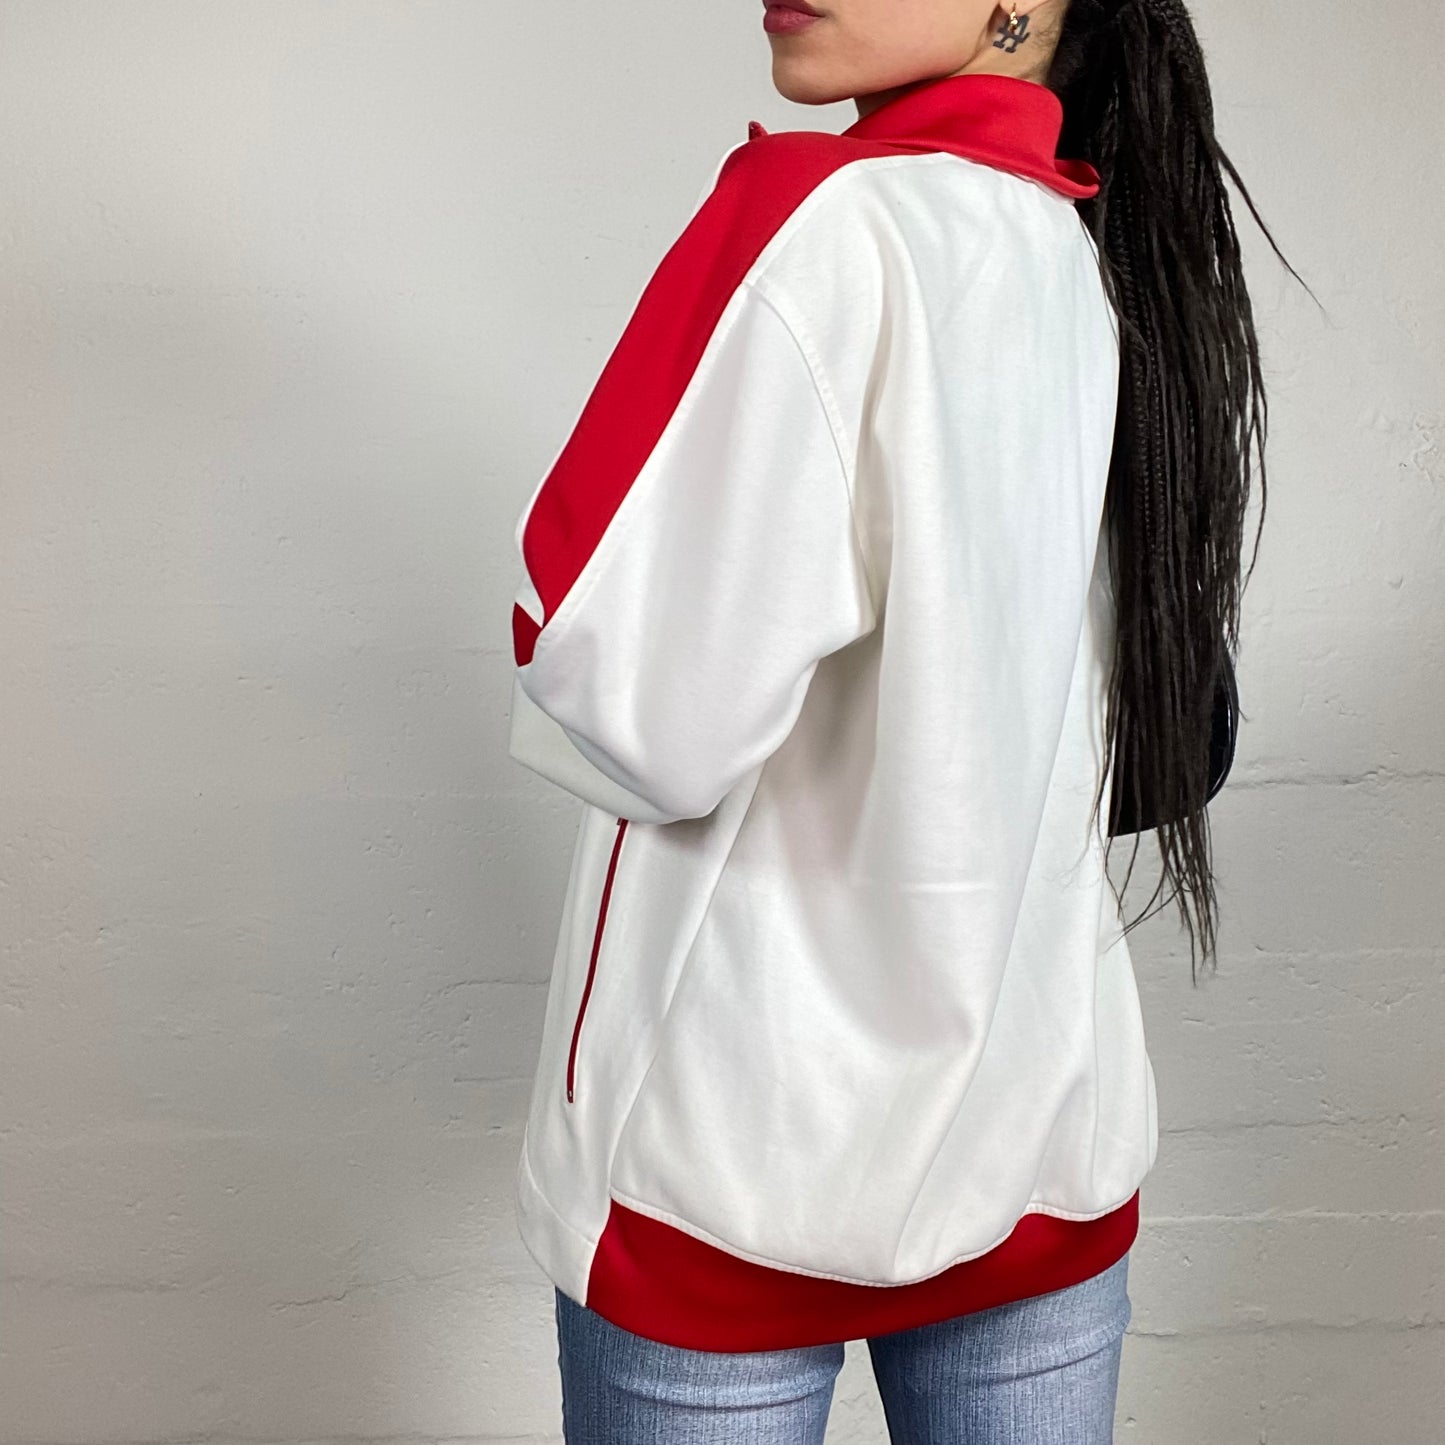 Vintage 90’s Puma Streetwear Skater Girl White and Red Zip Up Pullover (XL)